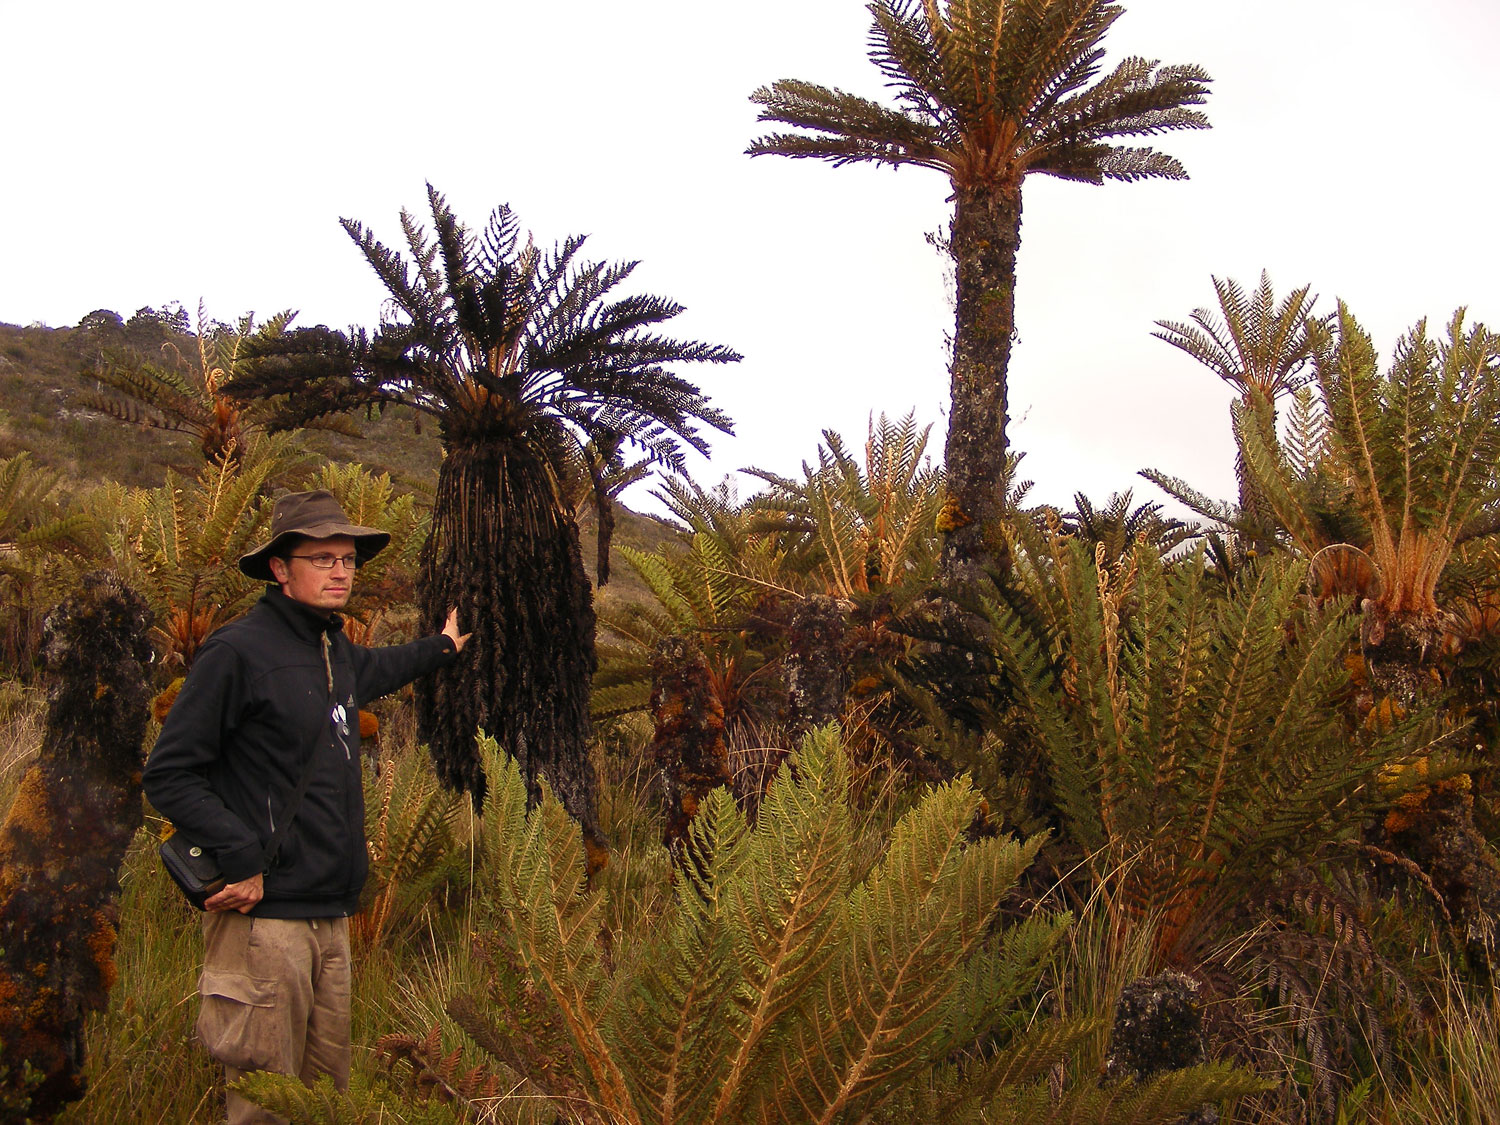 Researcher stood next to tree fern in New Guinea